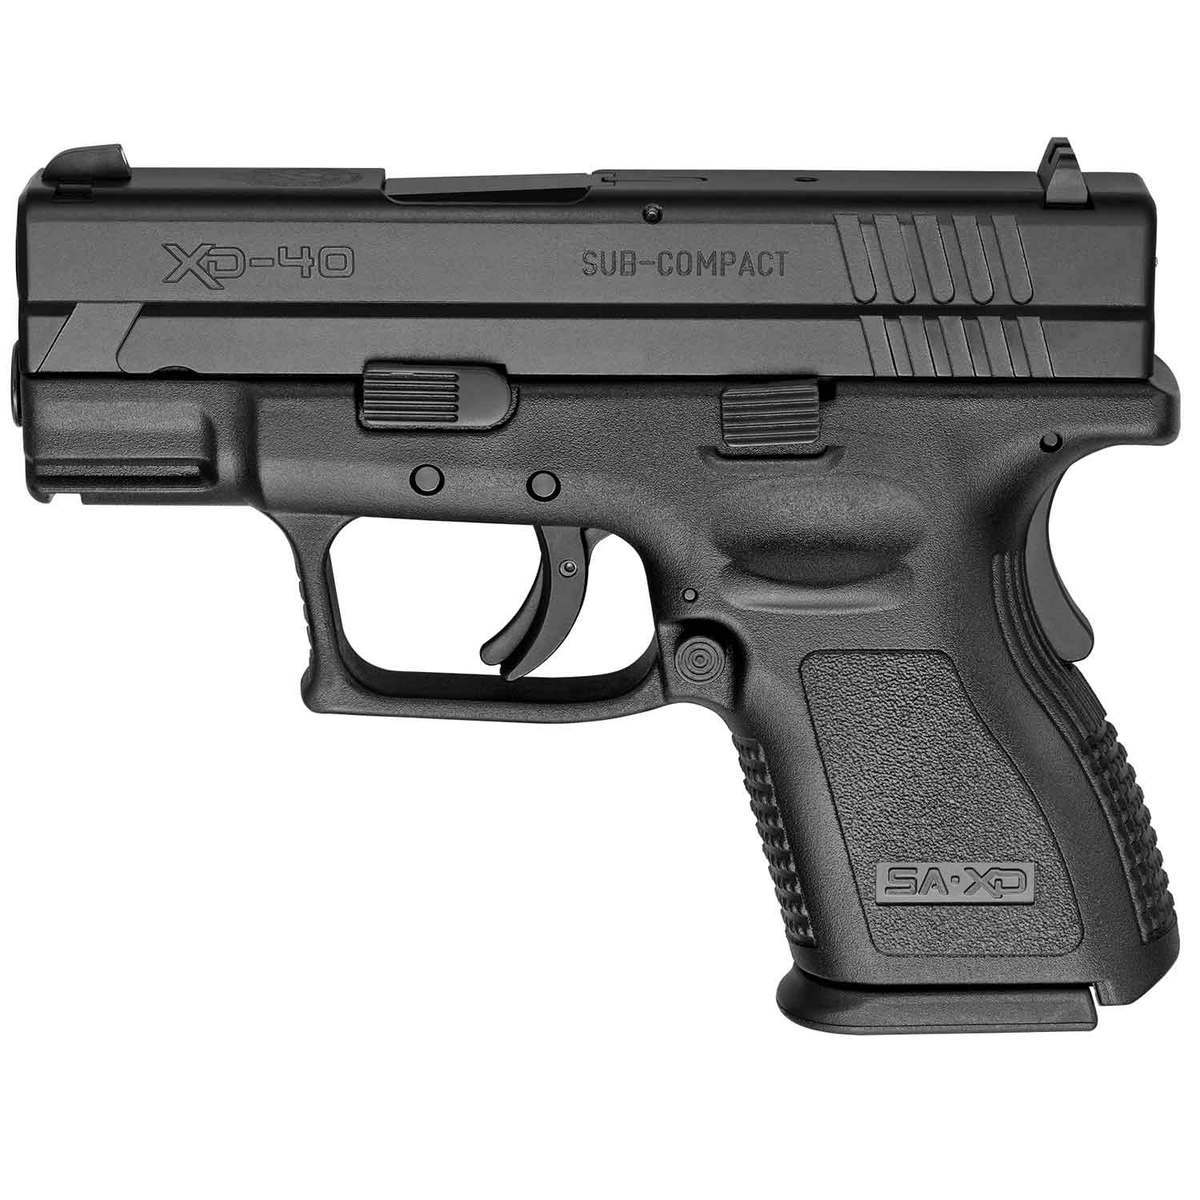 springfield-armory-xd-sub-compact-40-s-w-3in-black-pistol-9-1-rounds-california-compliant